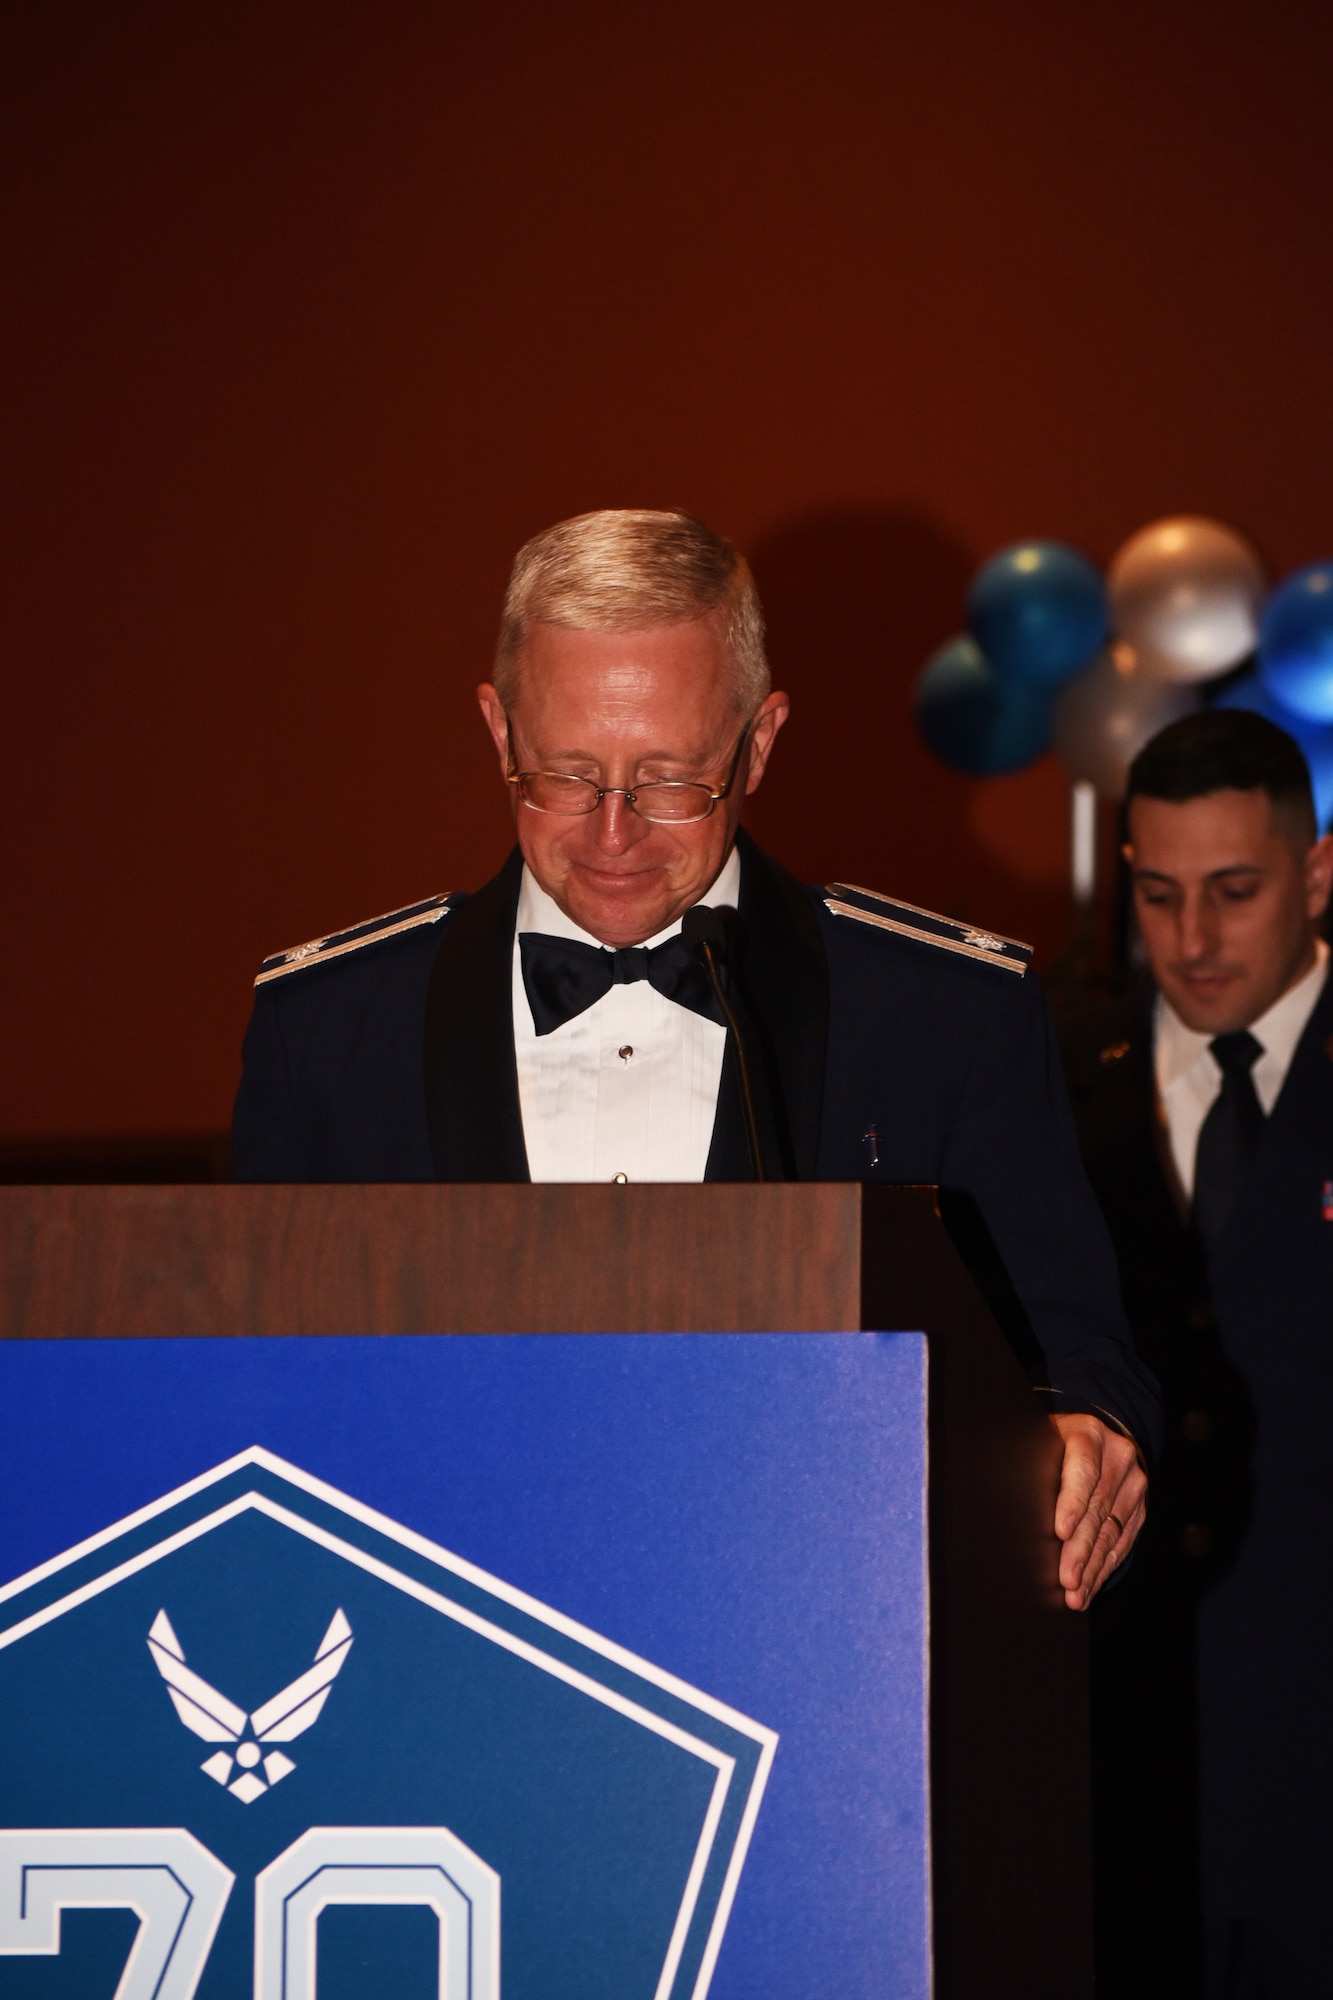 Chaplain (Lt. Col.) Sam Tucker gives the invocation during the Air Force Ball Sept. 16 at the Embassy Suites in Norman, Oklahoma. The event both celebrated the 70th birthday of the Air Force and the 75th anniversary of Tinker Air Force Base.